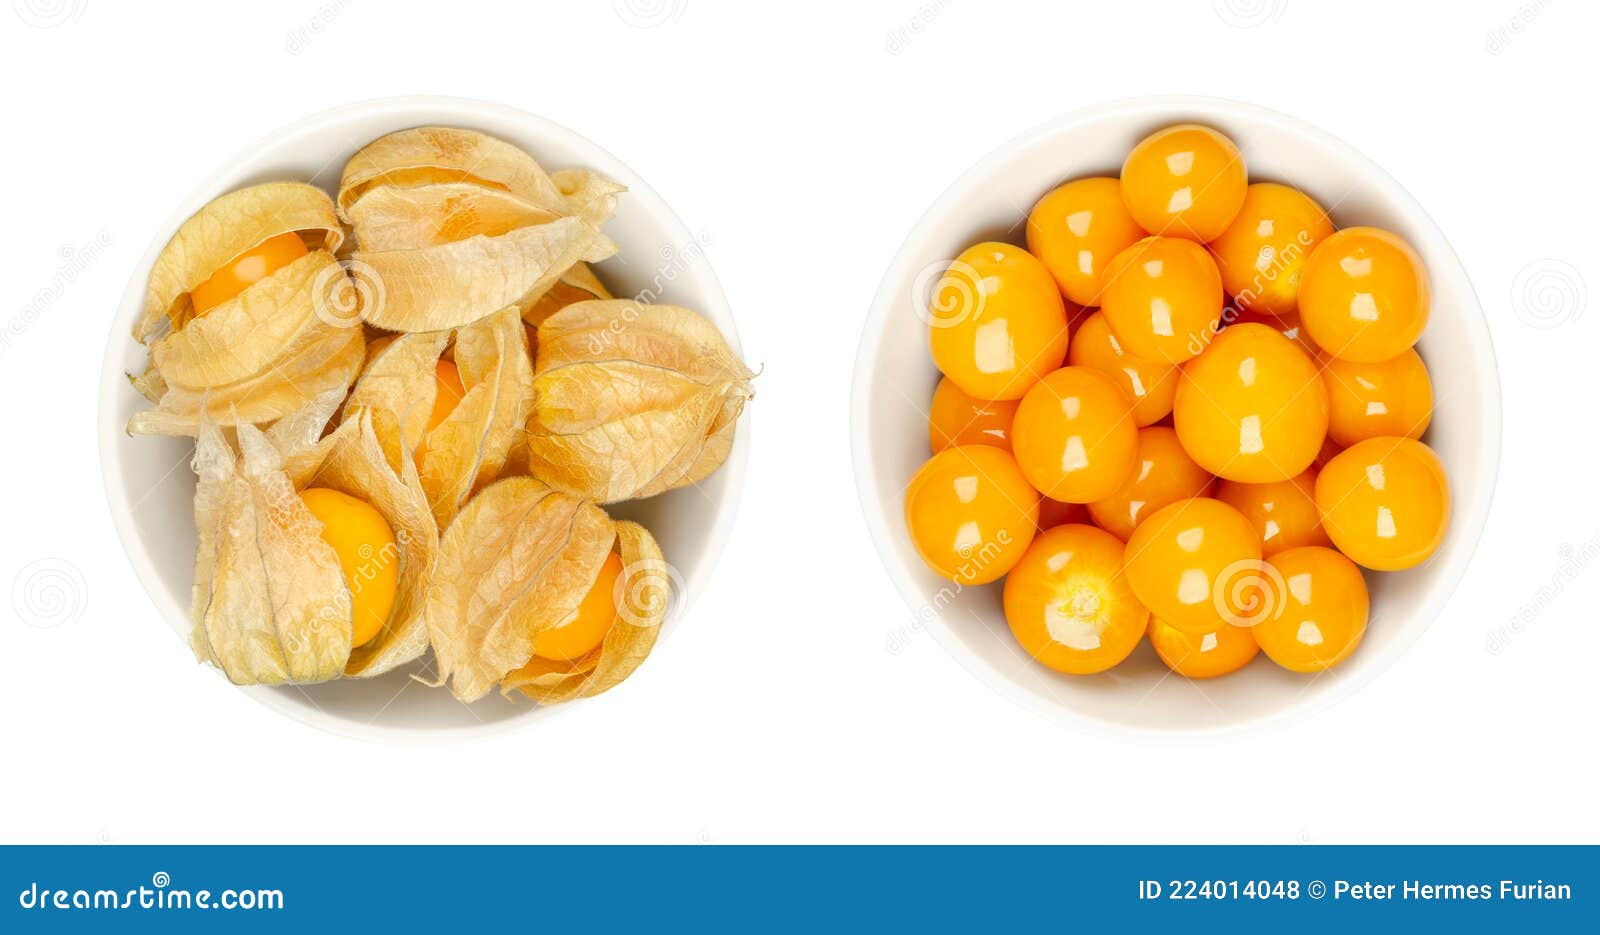 cape gooseberries, with and without calyx, in white bowls